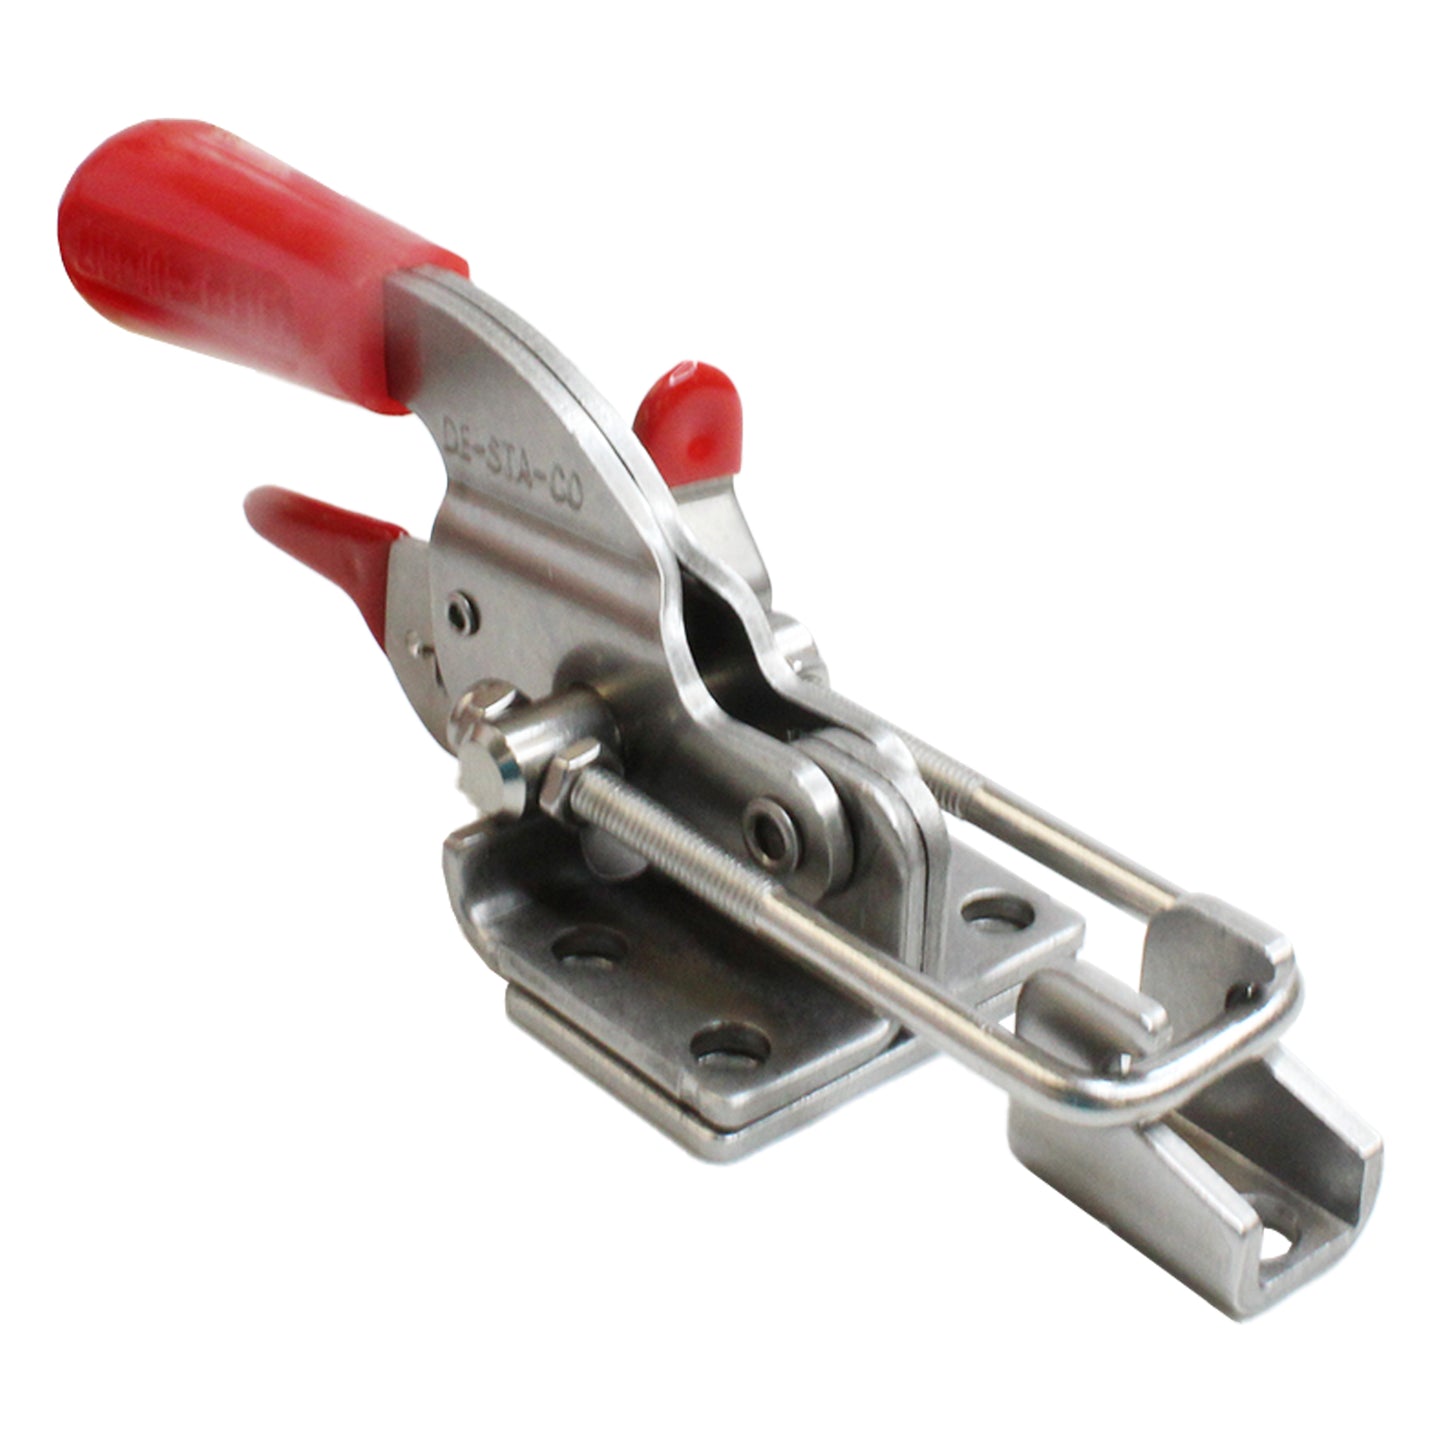 Destaco 331-RSS Pull-Action Latch Clamp